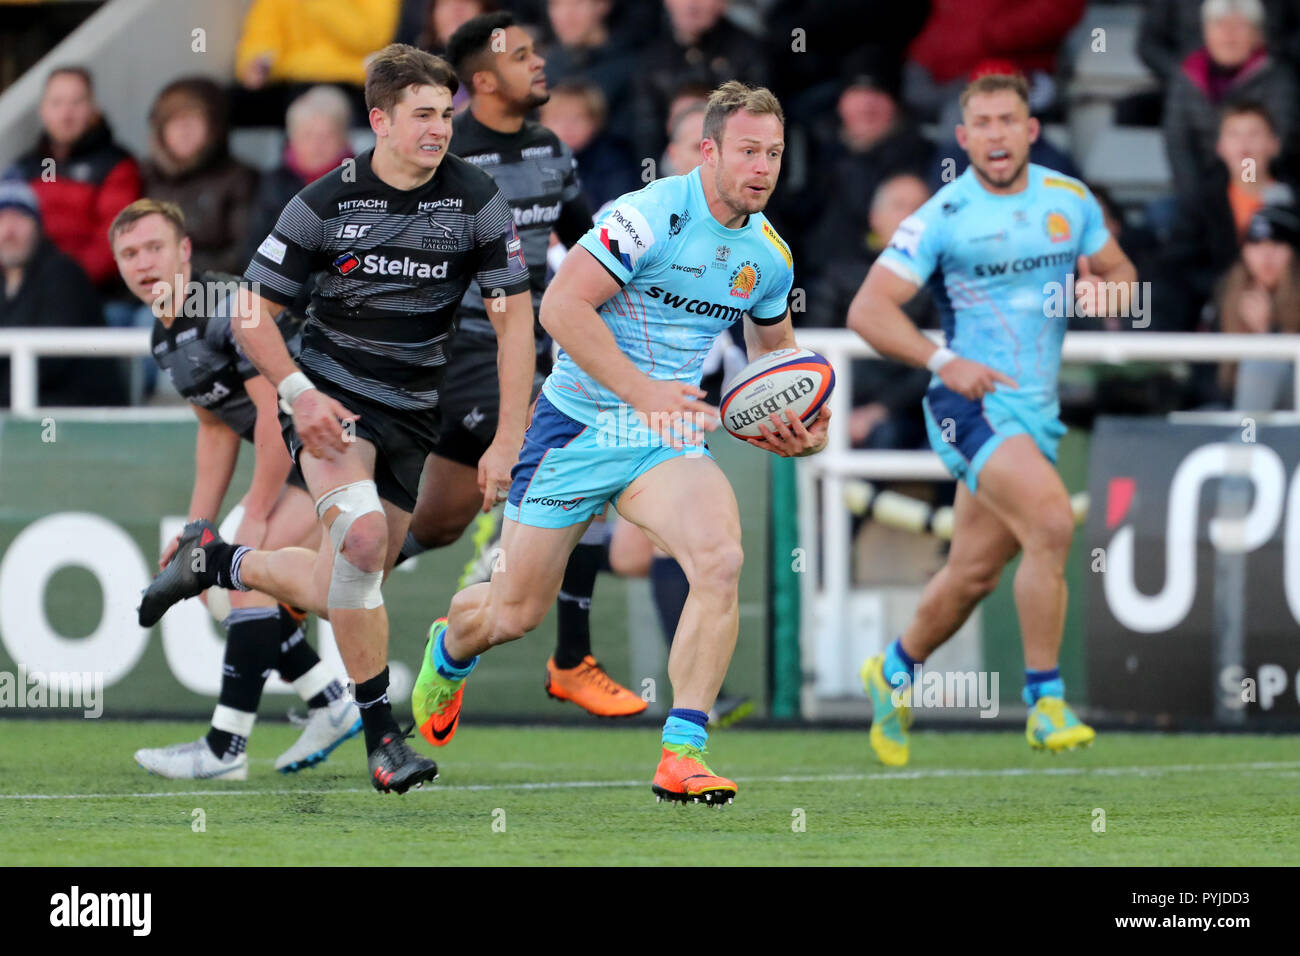 Exeter Chiefs James Short on his way to scoring during the Premiership Rugby Cup match at Kingston Park, Newcastle. Stock Photo